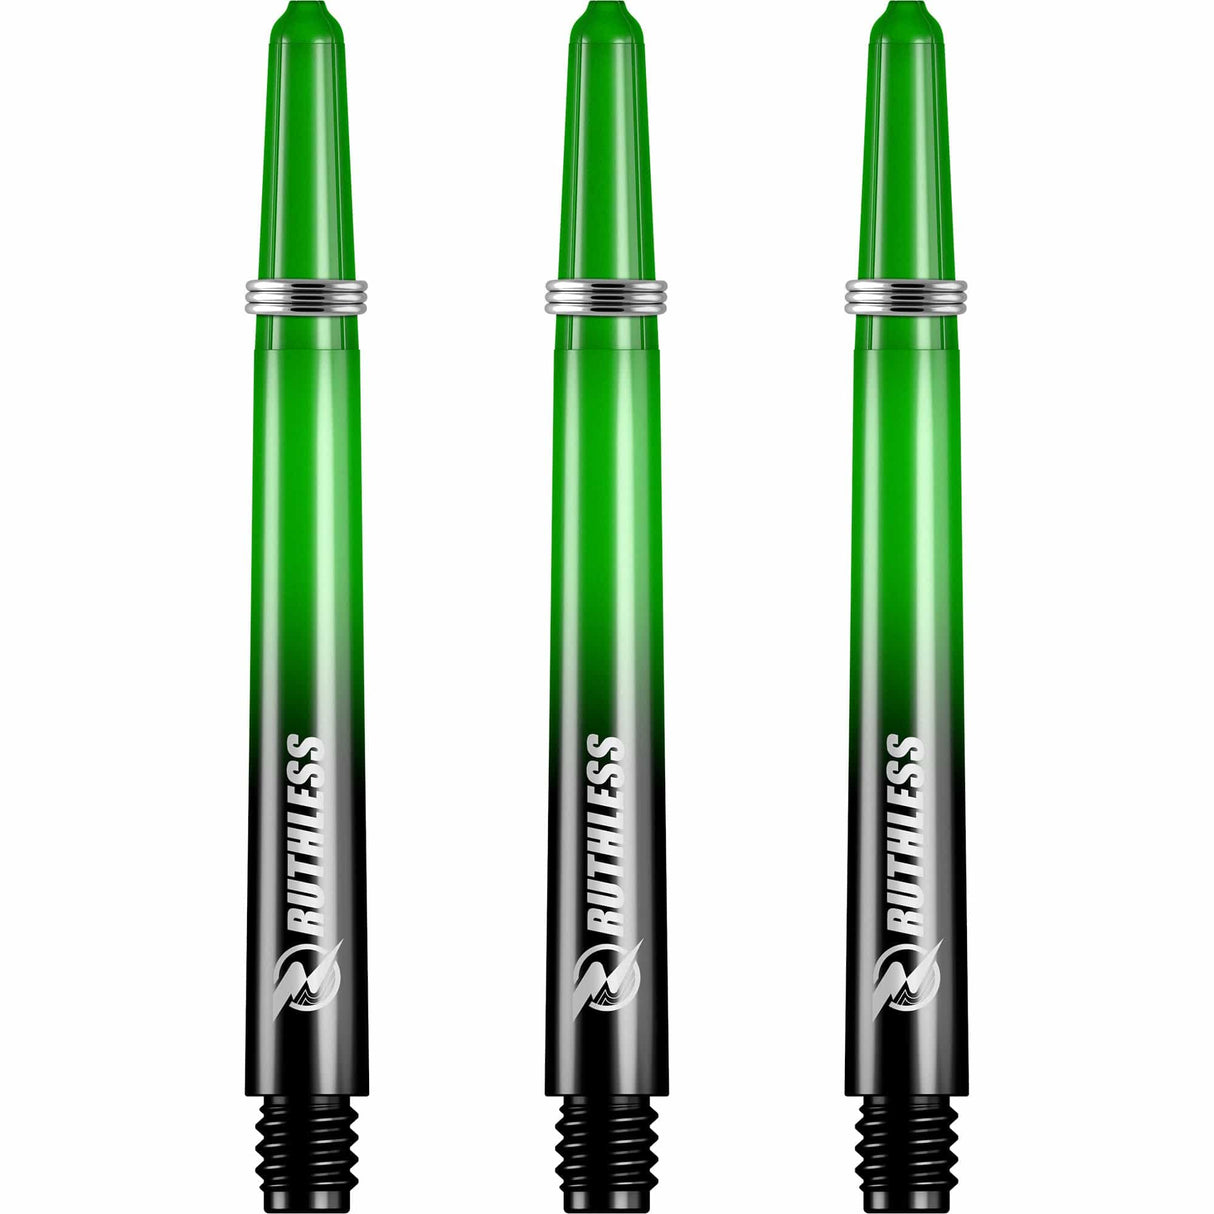 Ruthless Deflectagrip Plus Dart Shafts - Polycarbonate Stems with Springs - Green Medium